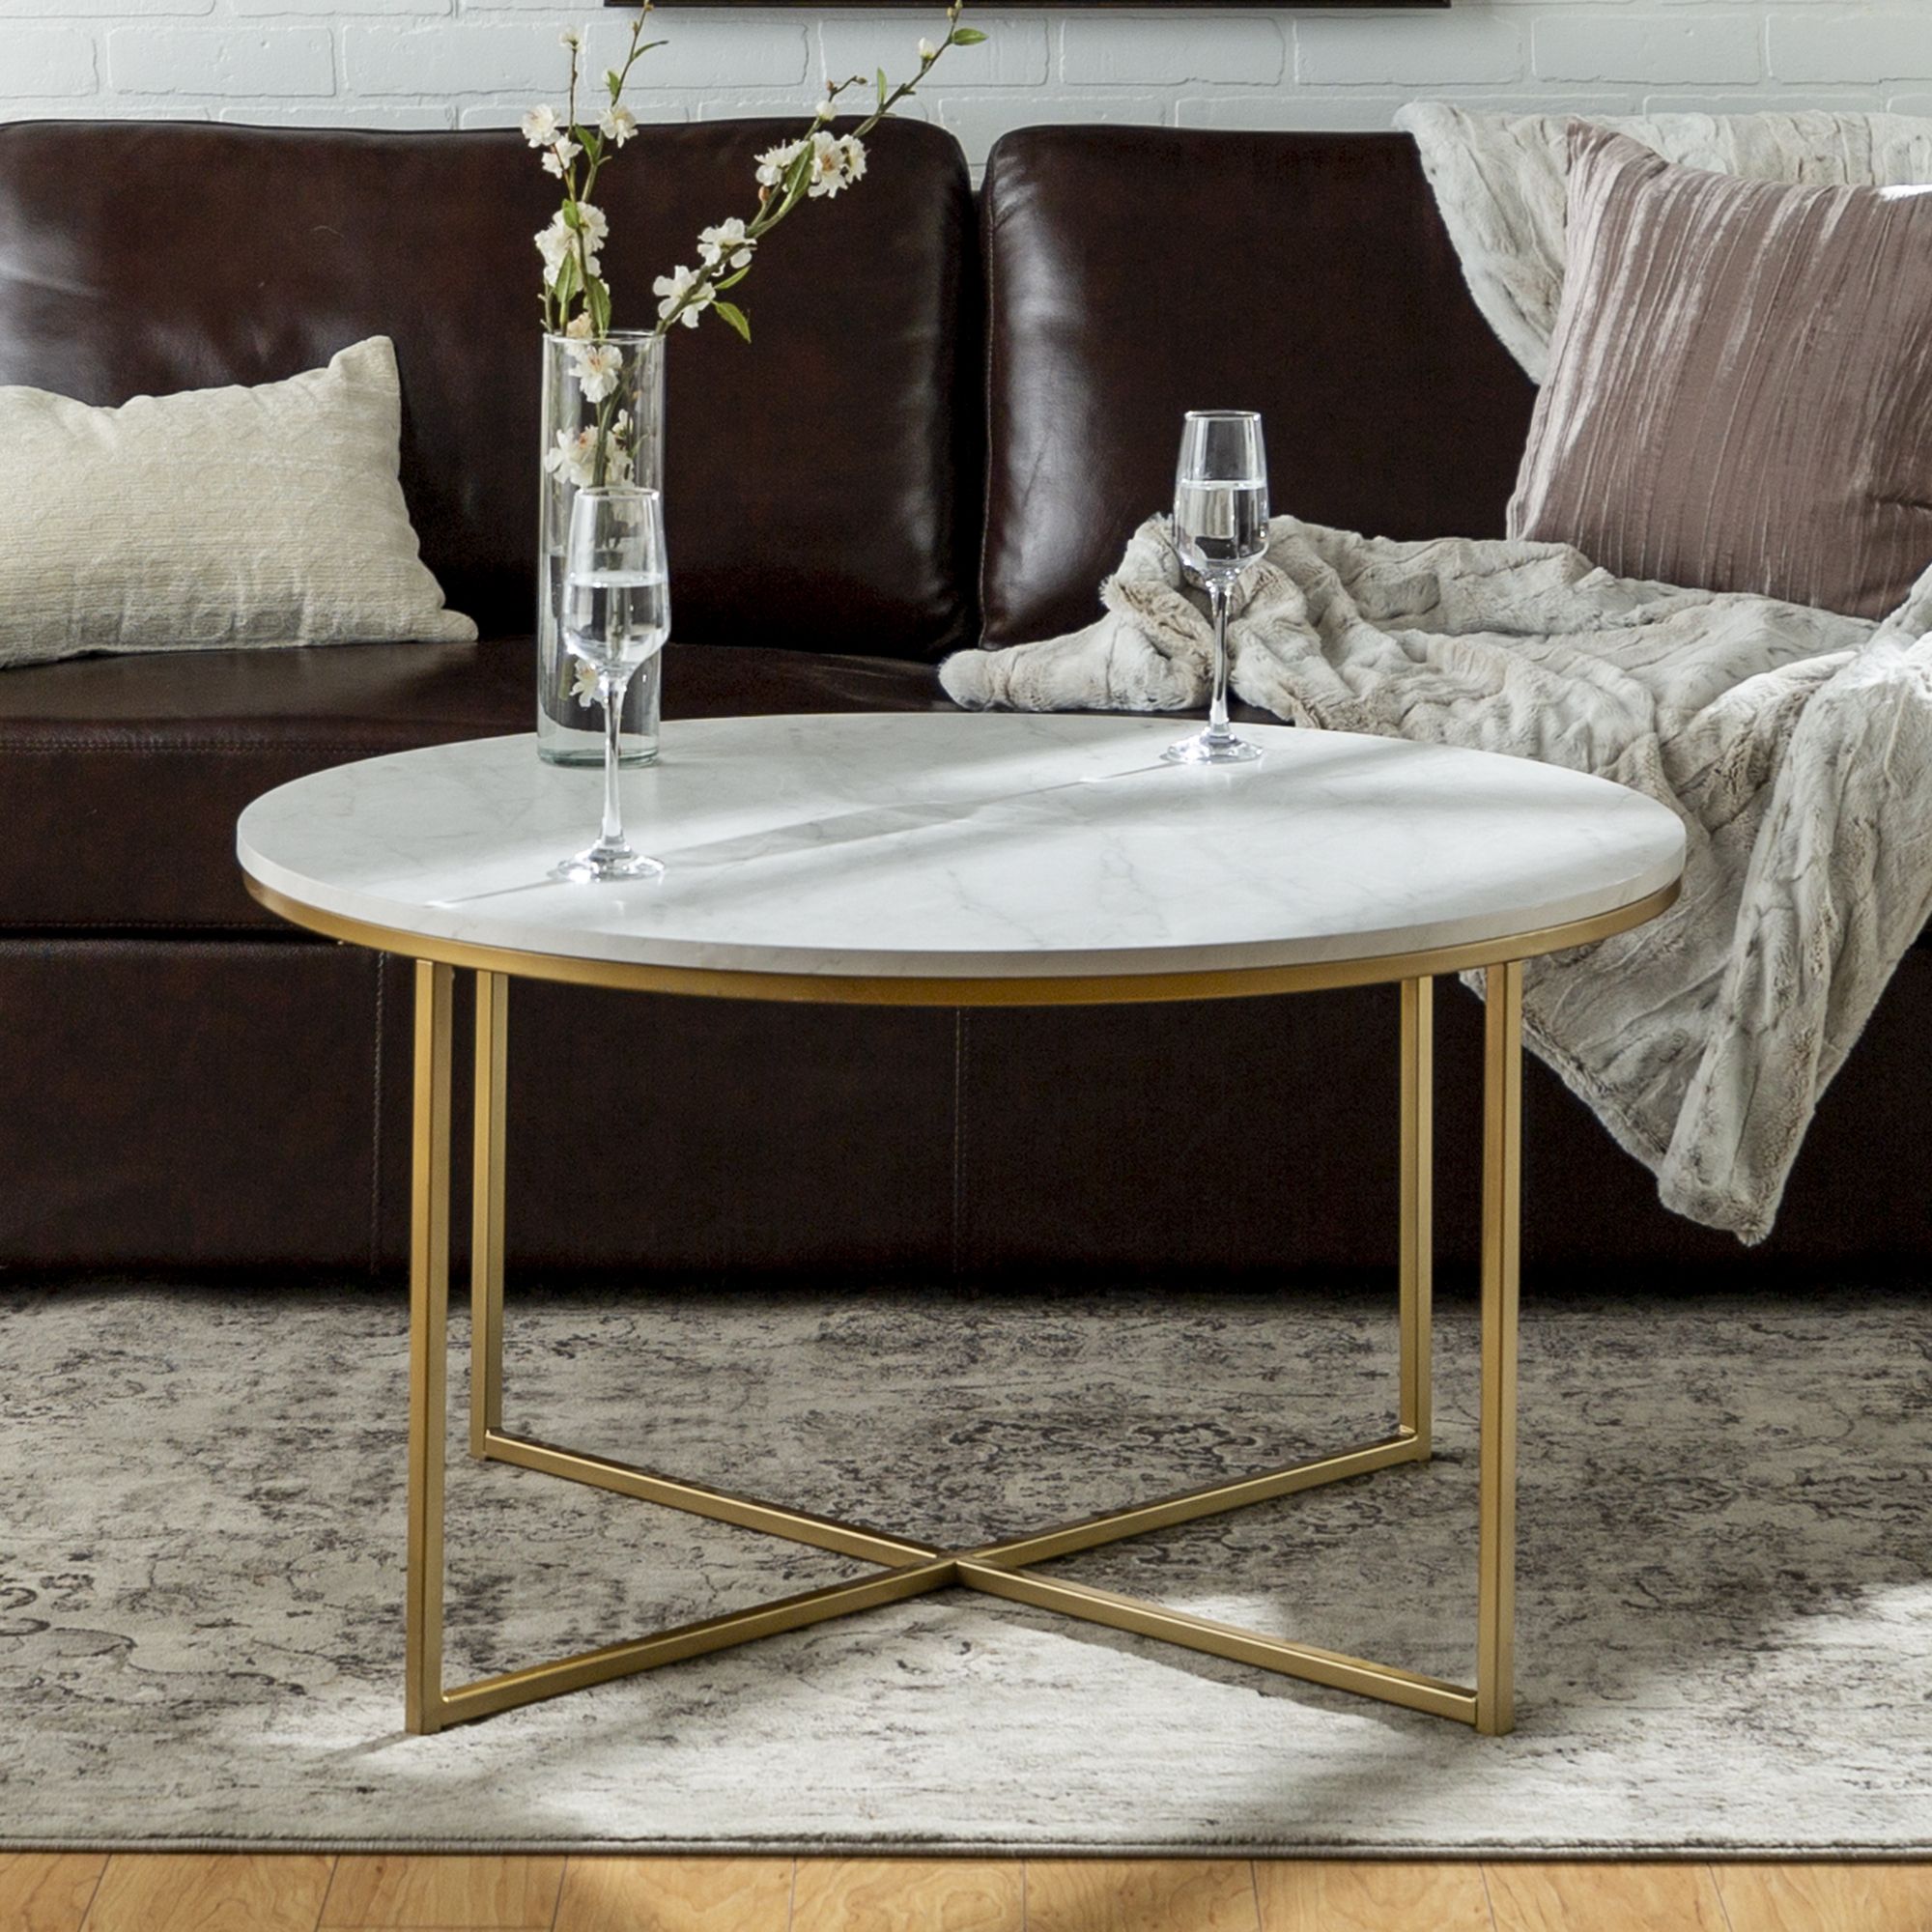 Ember Interiors Modern Round Coffee Table, Faux White Marble/gold –  Walmart Pertaining To Faux Marble Gold Coffee Tables (View 7 of 15)